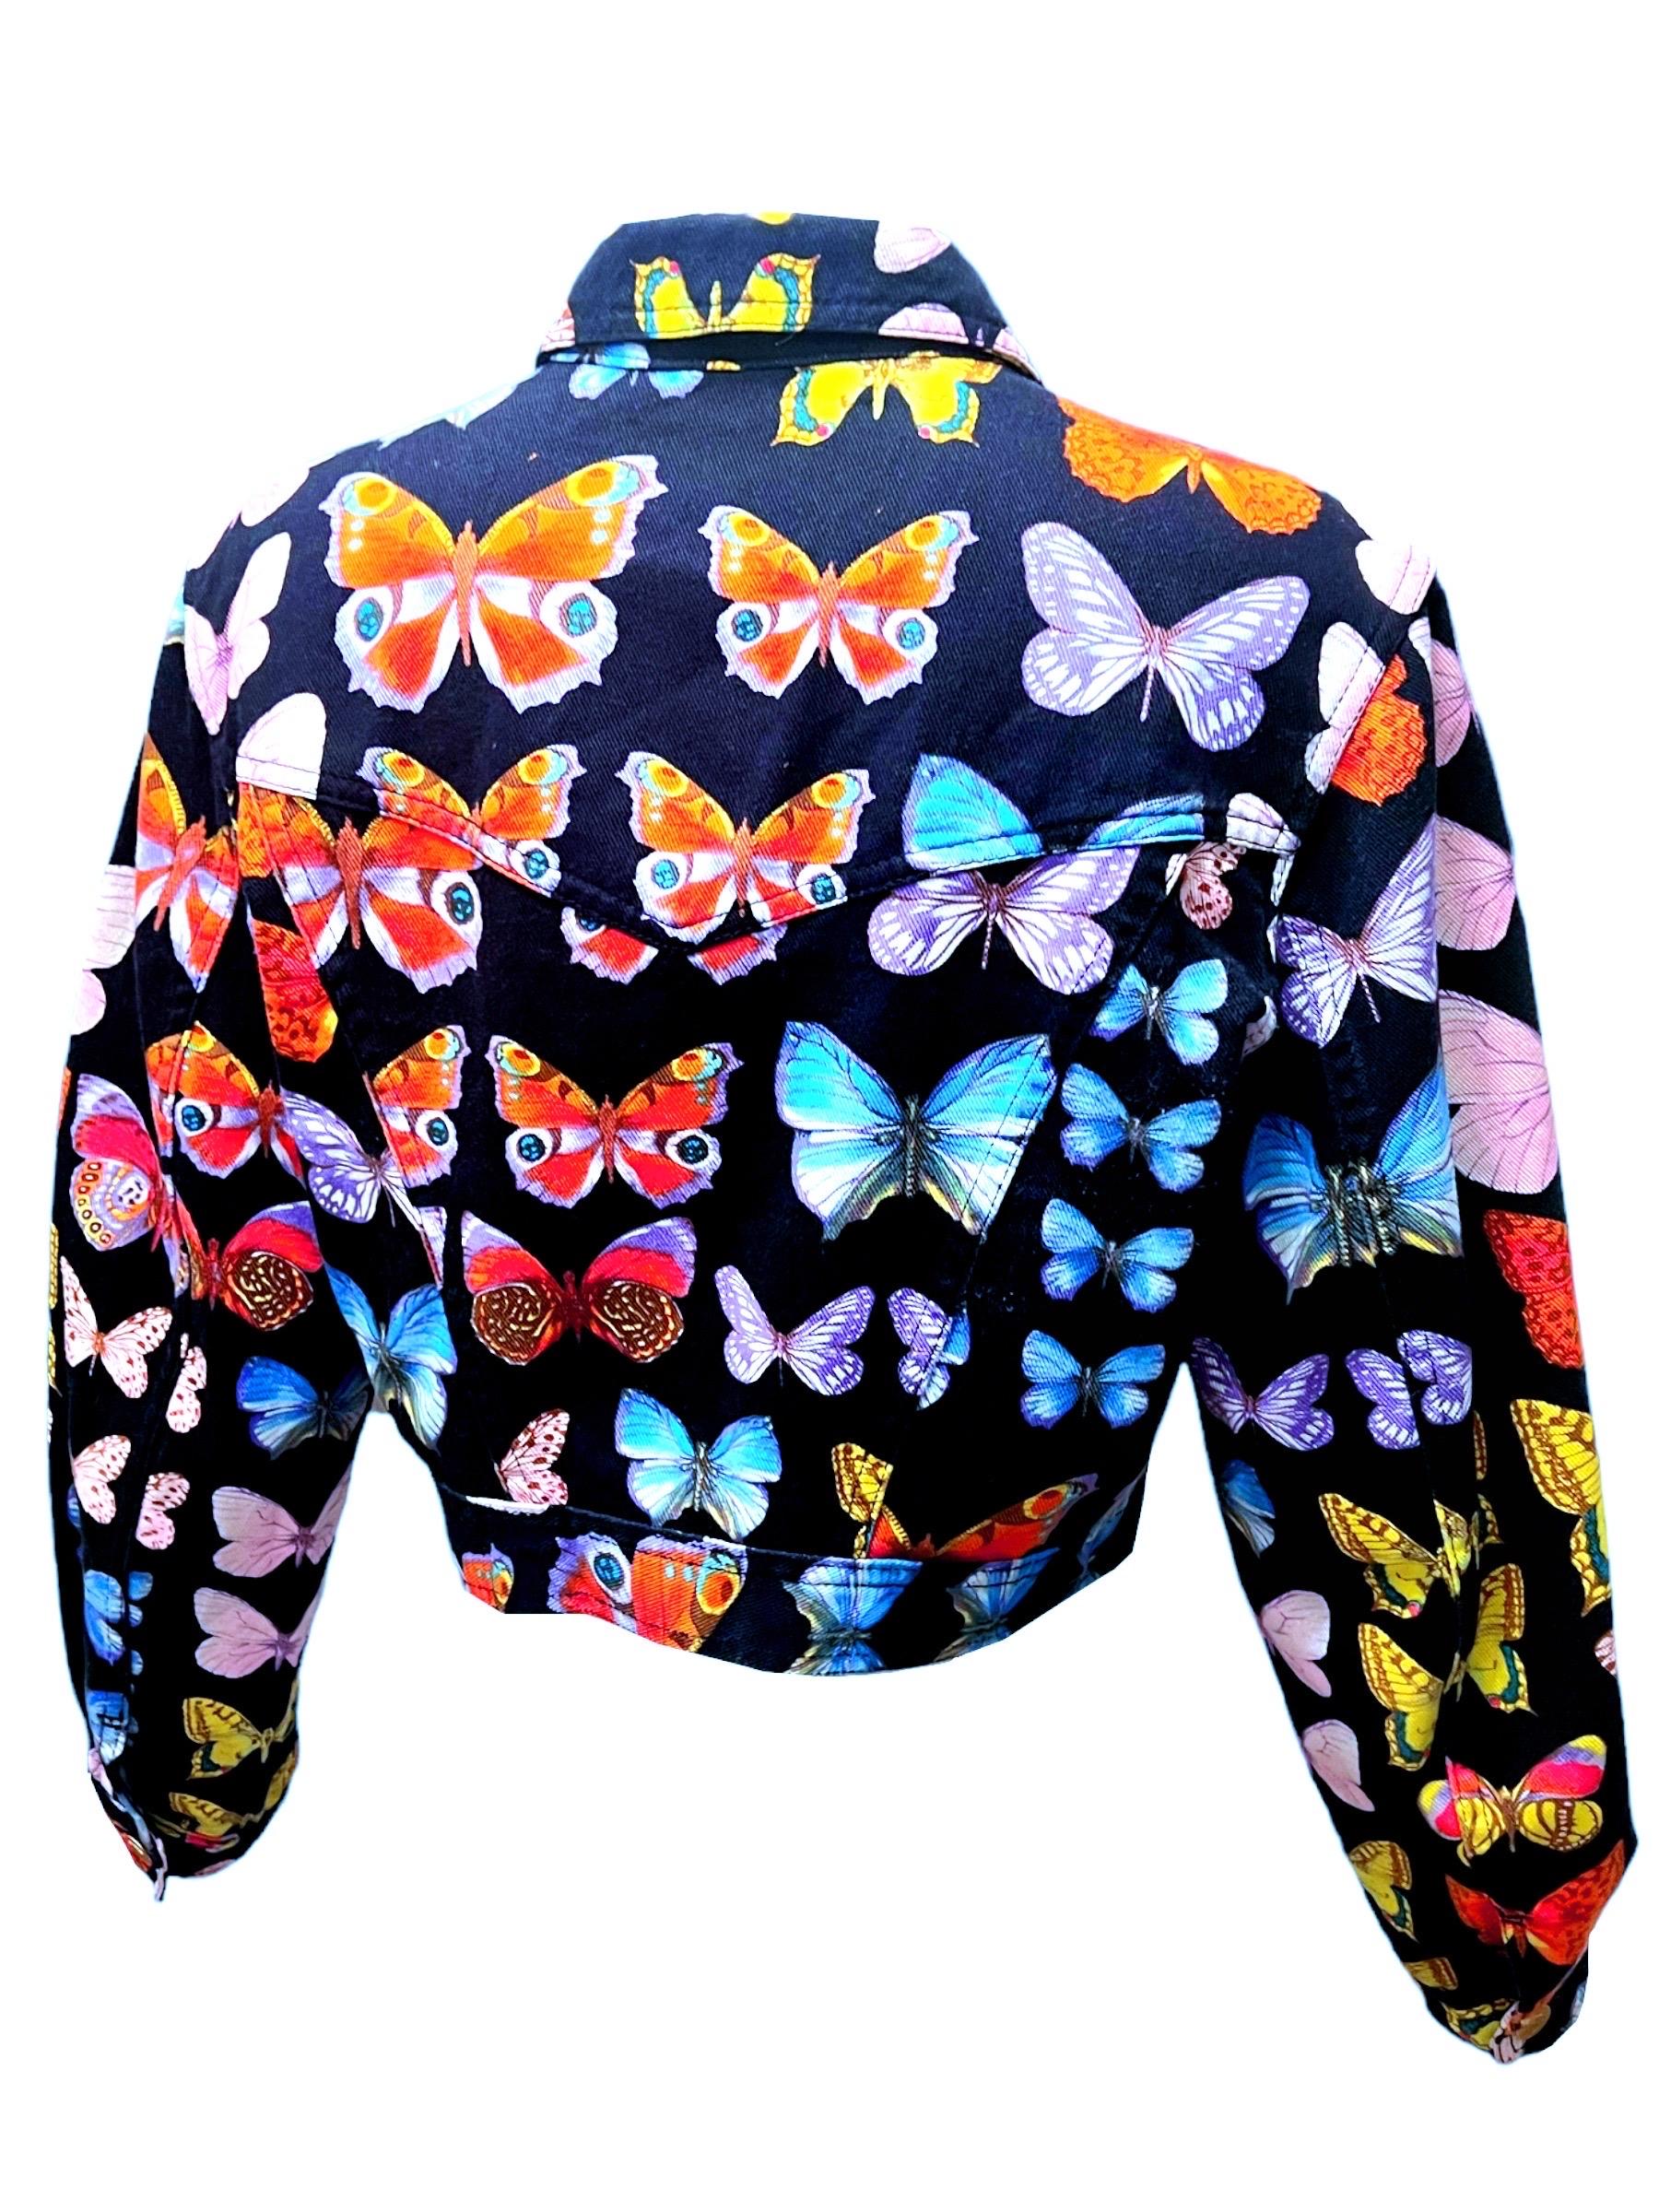 S/S 1995 Gianni Versace Butterfly Printed Jacket For Sale 2